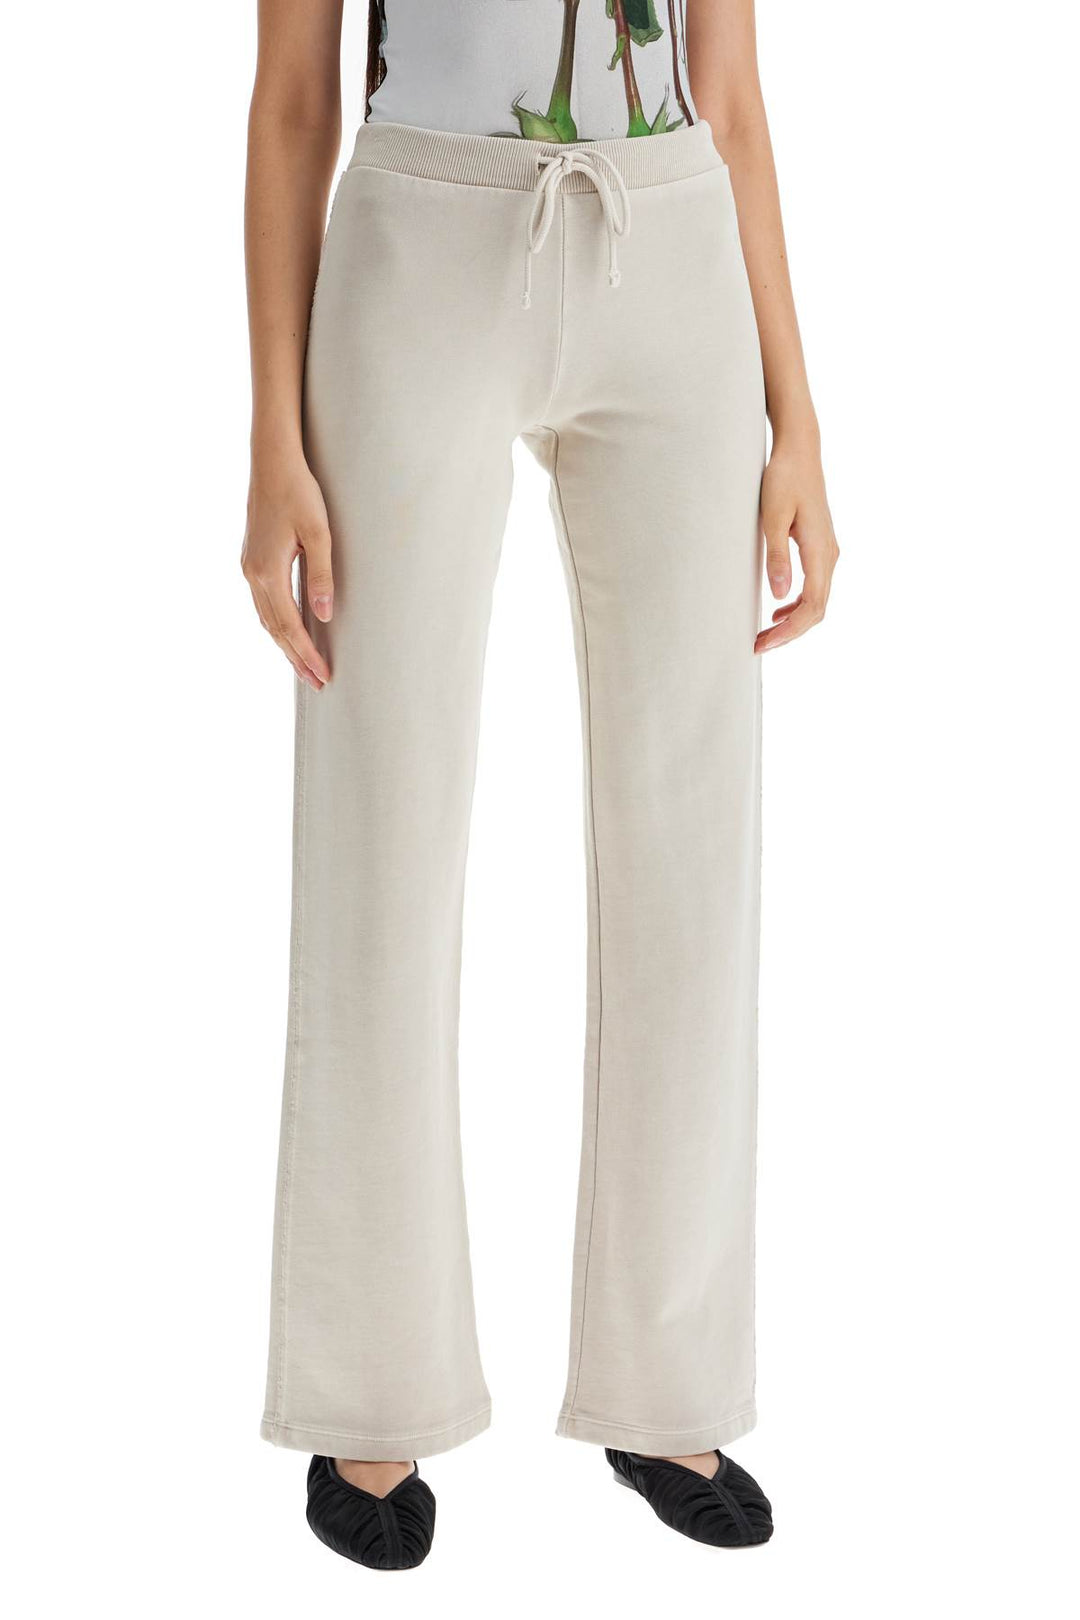 Paloma Wool Low Waisted Miller Sports Pants With   Beige